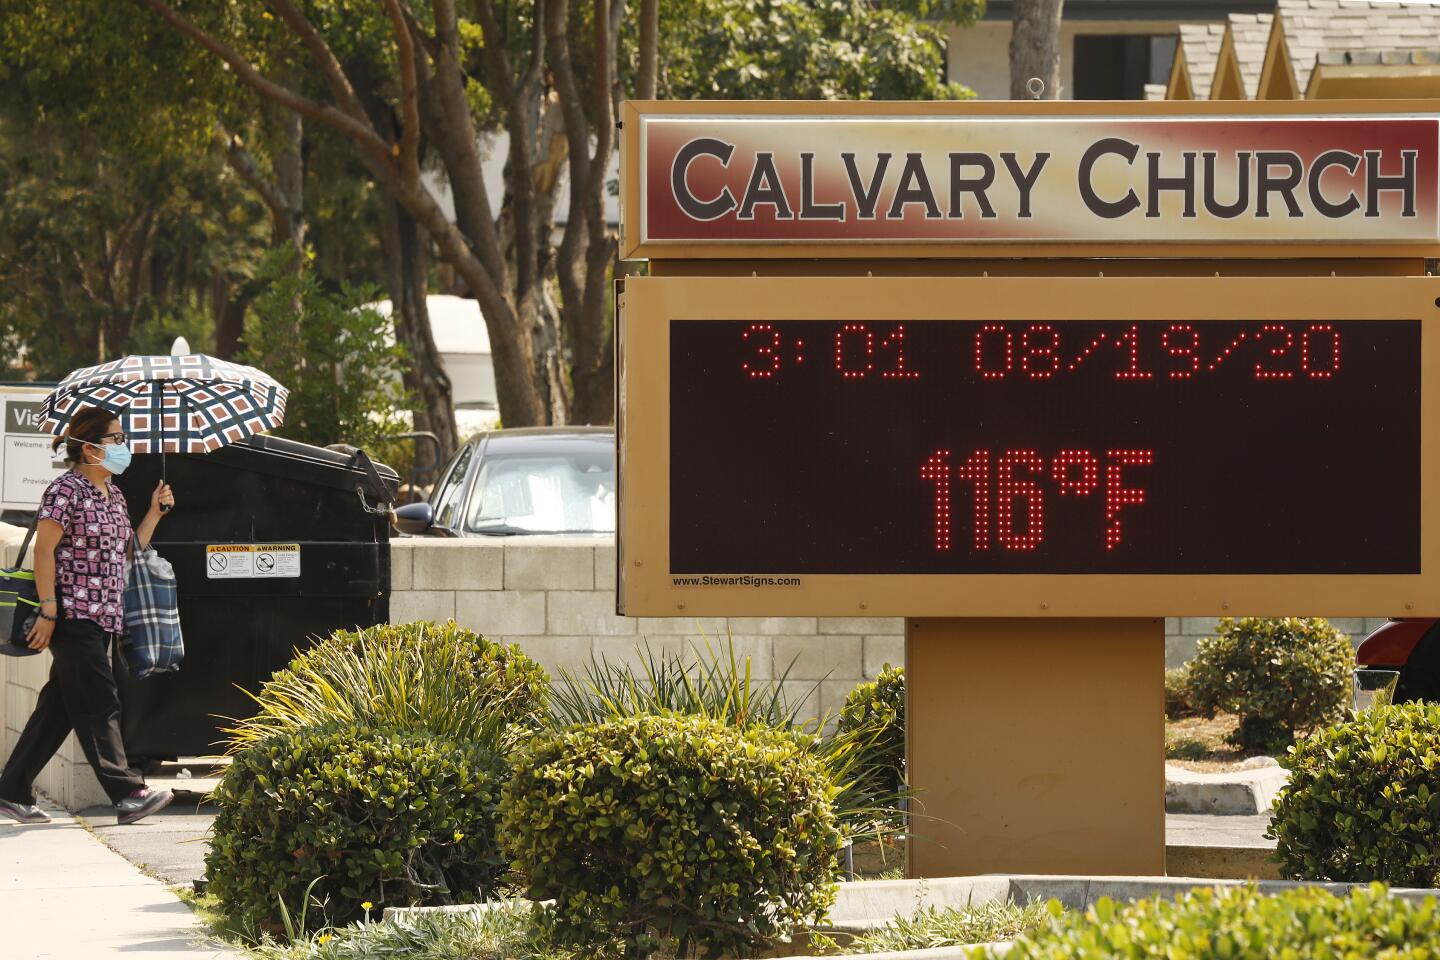 The thermometer at Calvary Church in Woodland Hills registers 116 degrees.